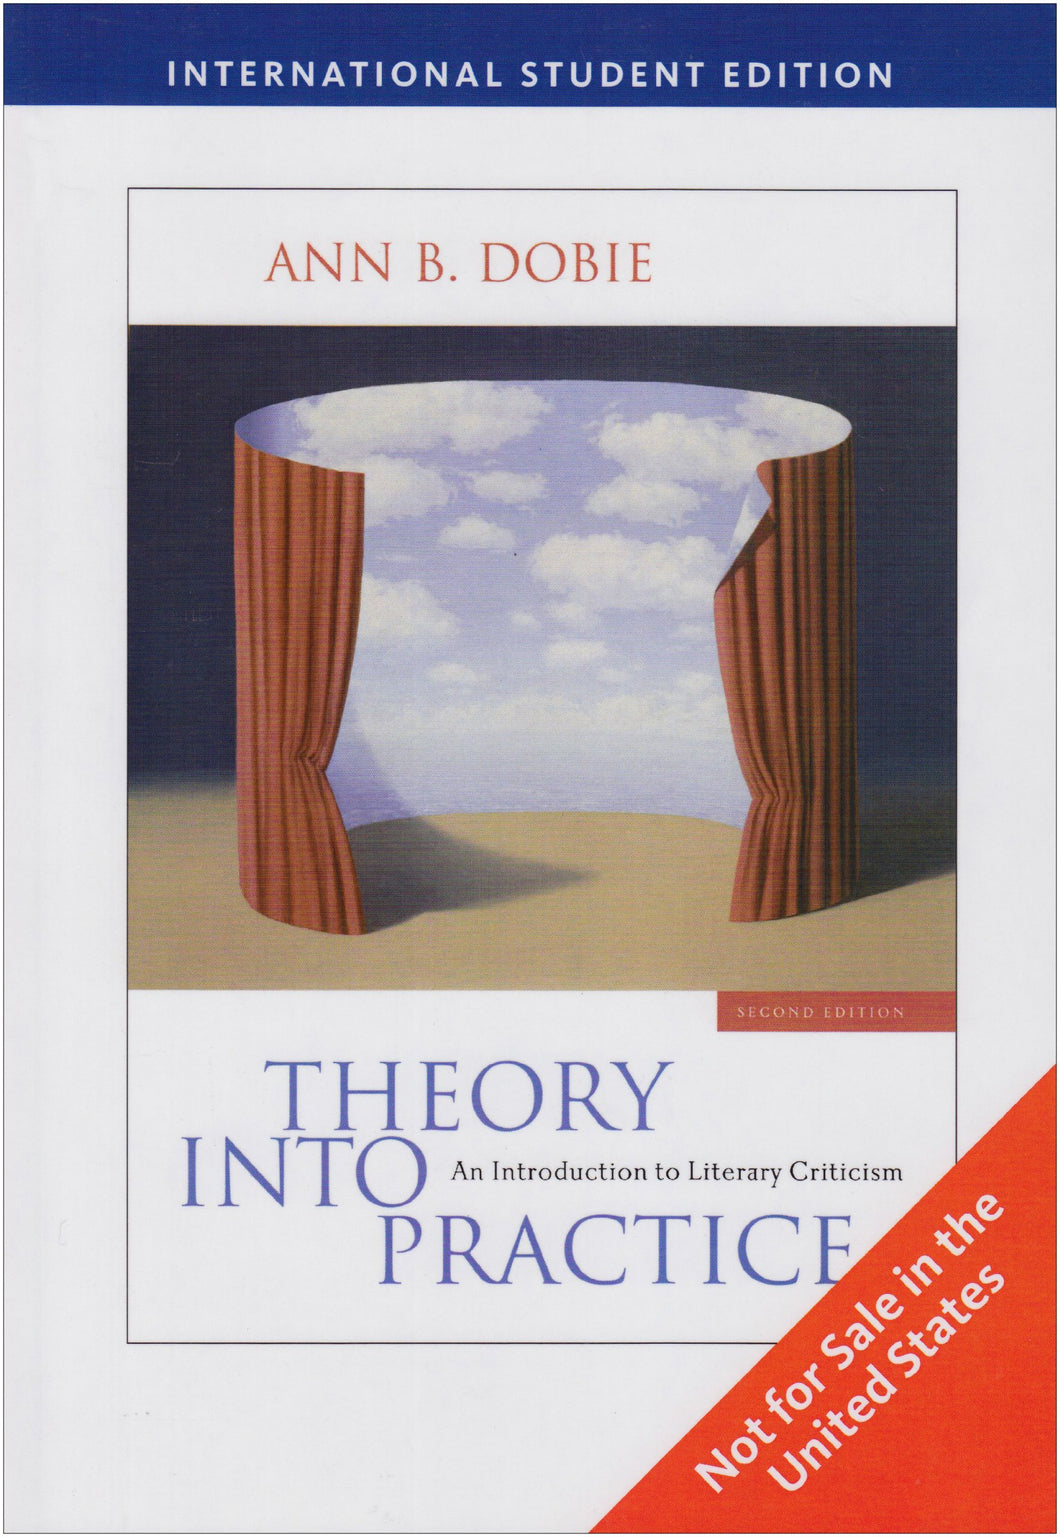 Theory Into Practice [Paperback] 2e by DOBIE